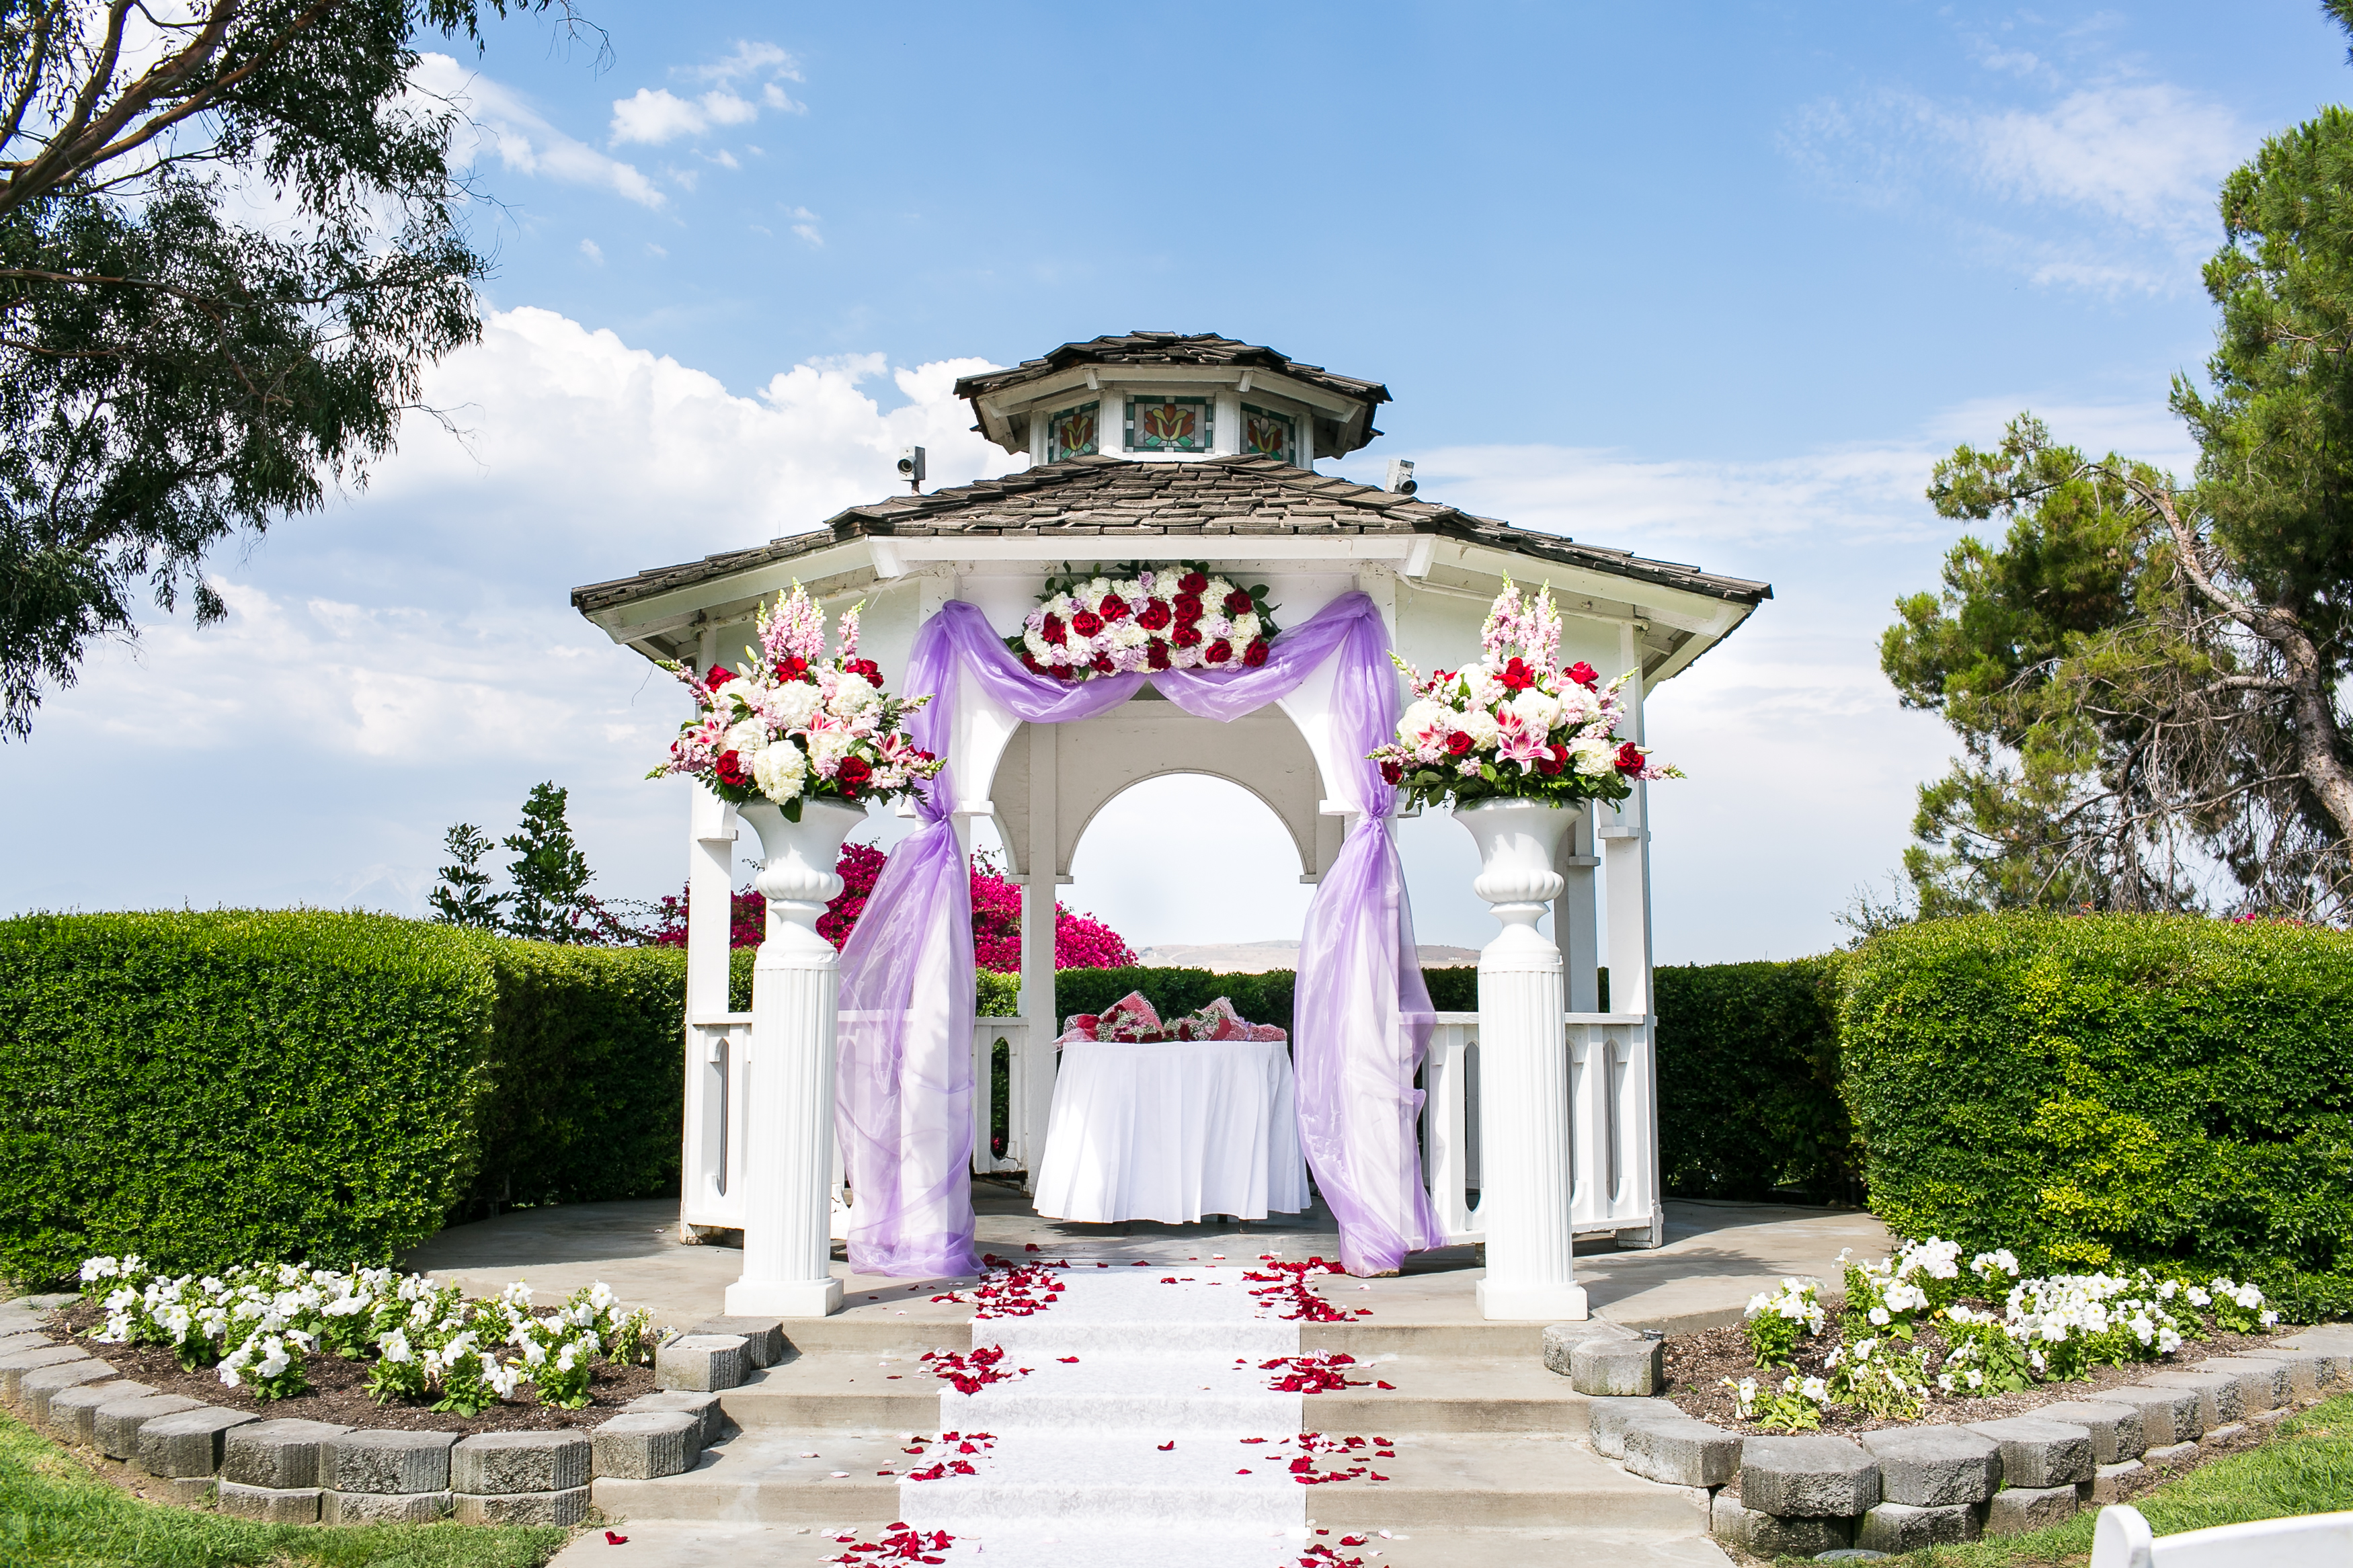 White gazebo with purple accent drapes covered in red and white flowers